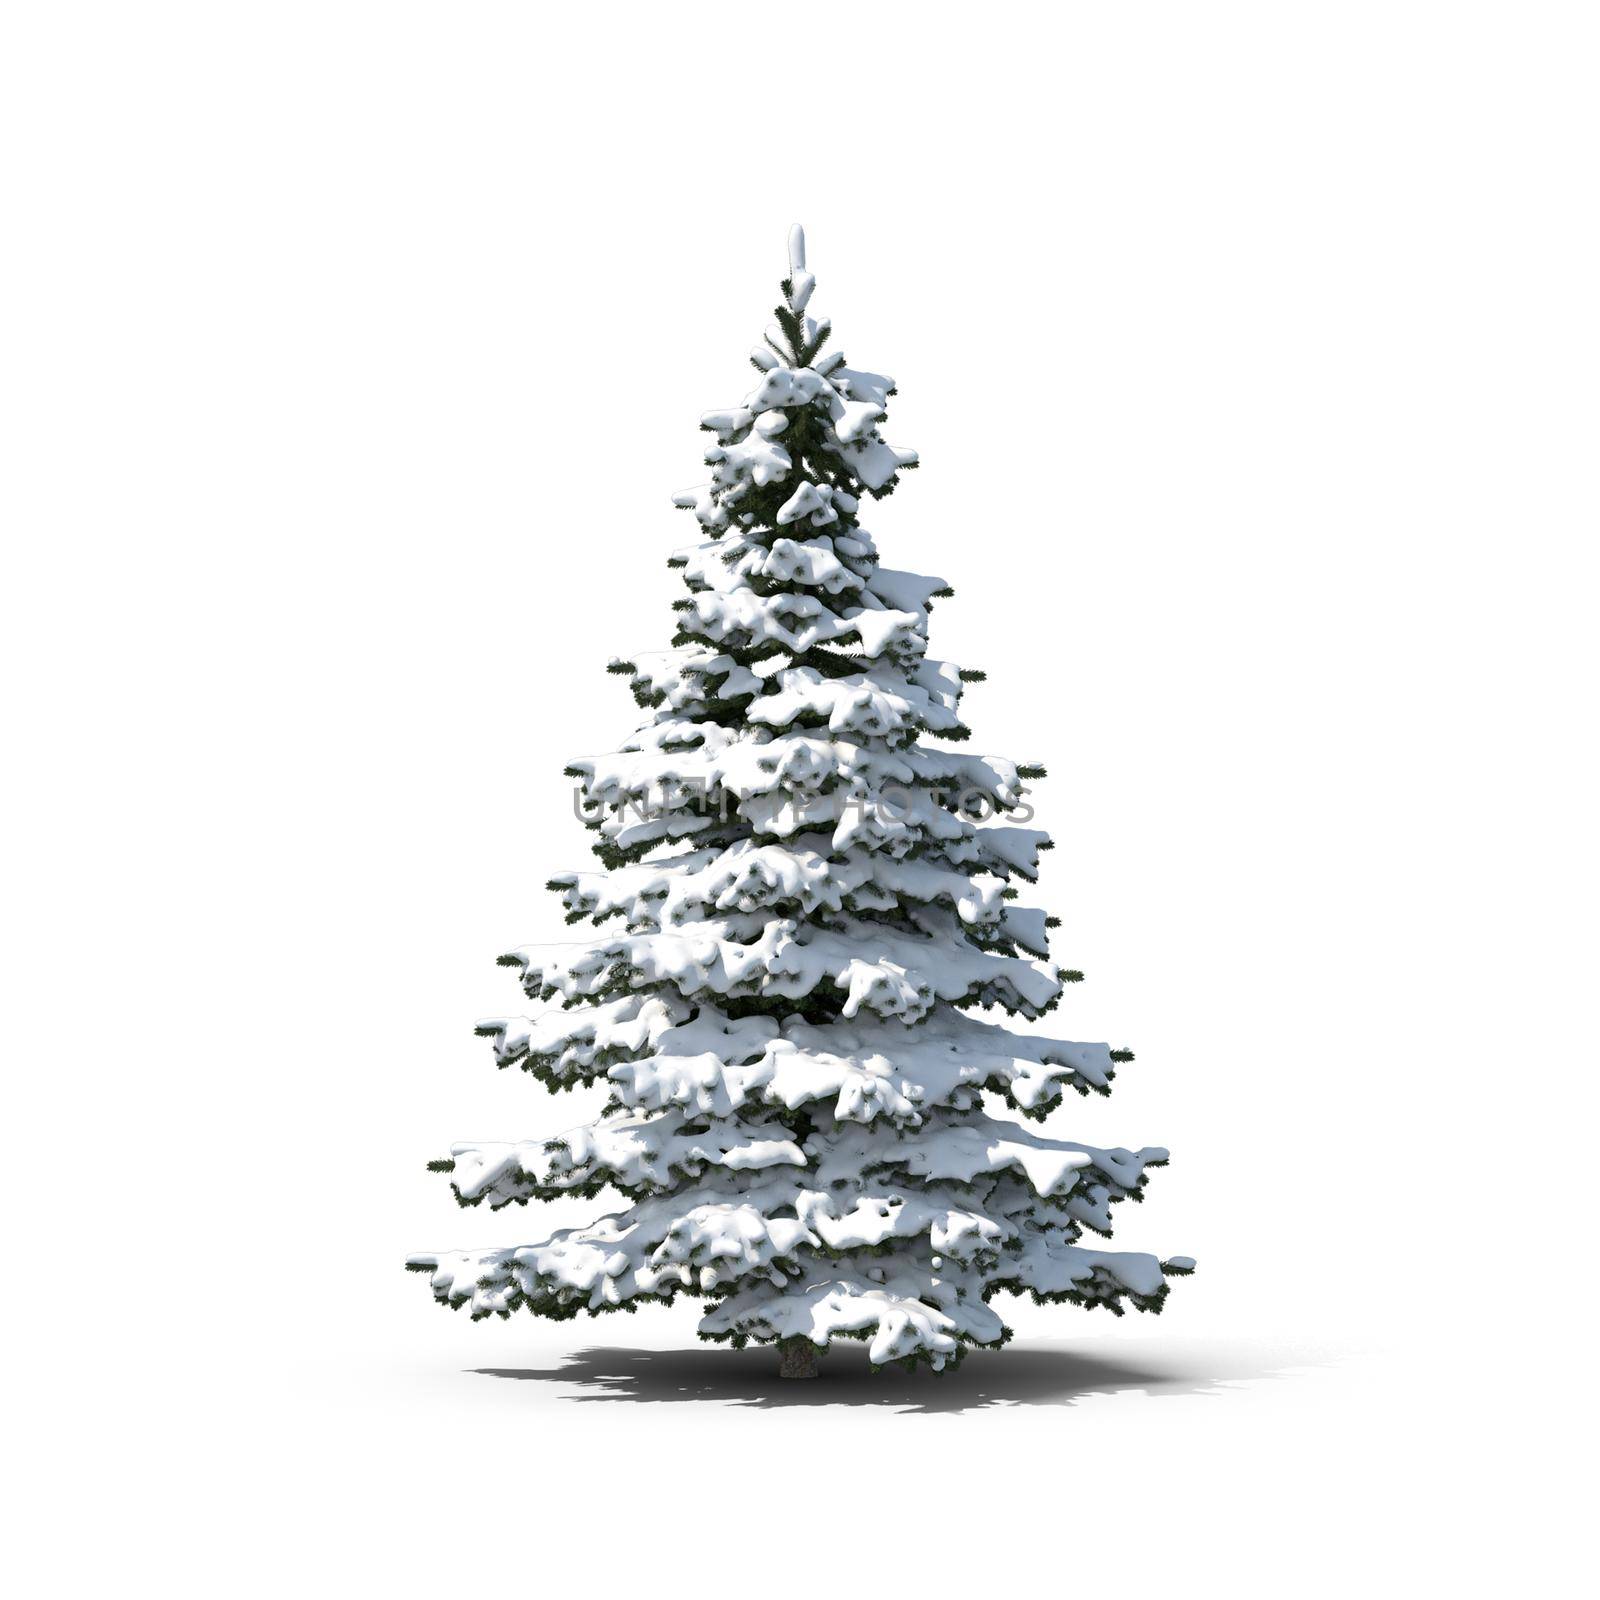 Beautiful Christmas tree with snow on branches on white background. 3D rendering.